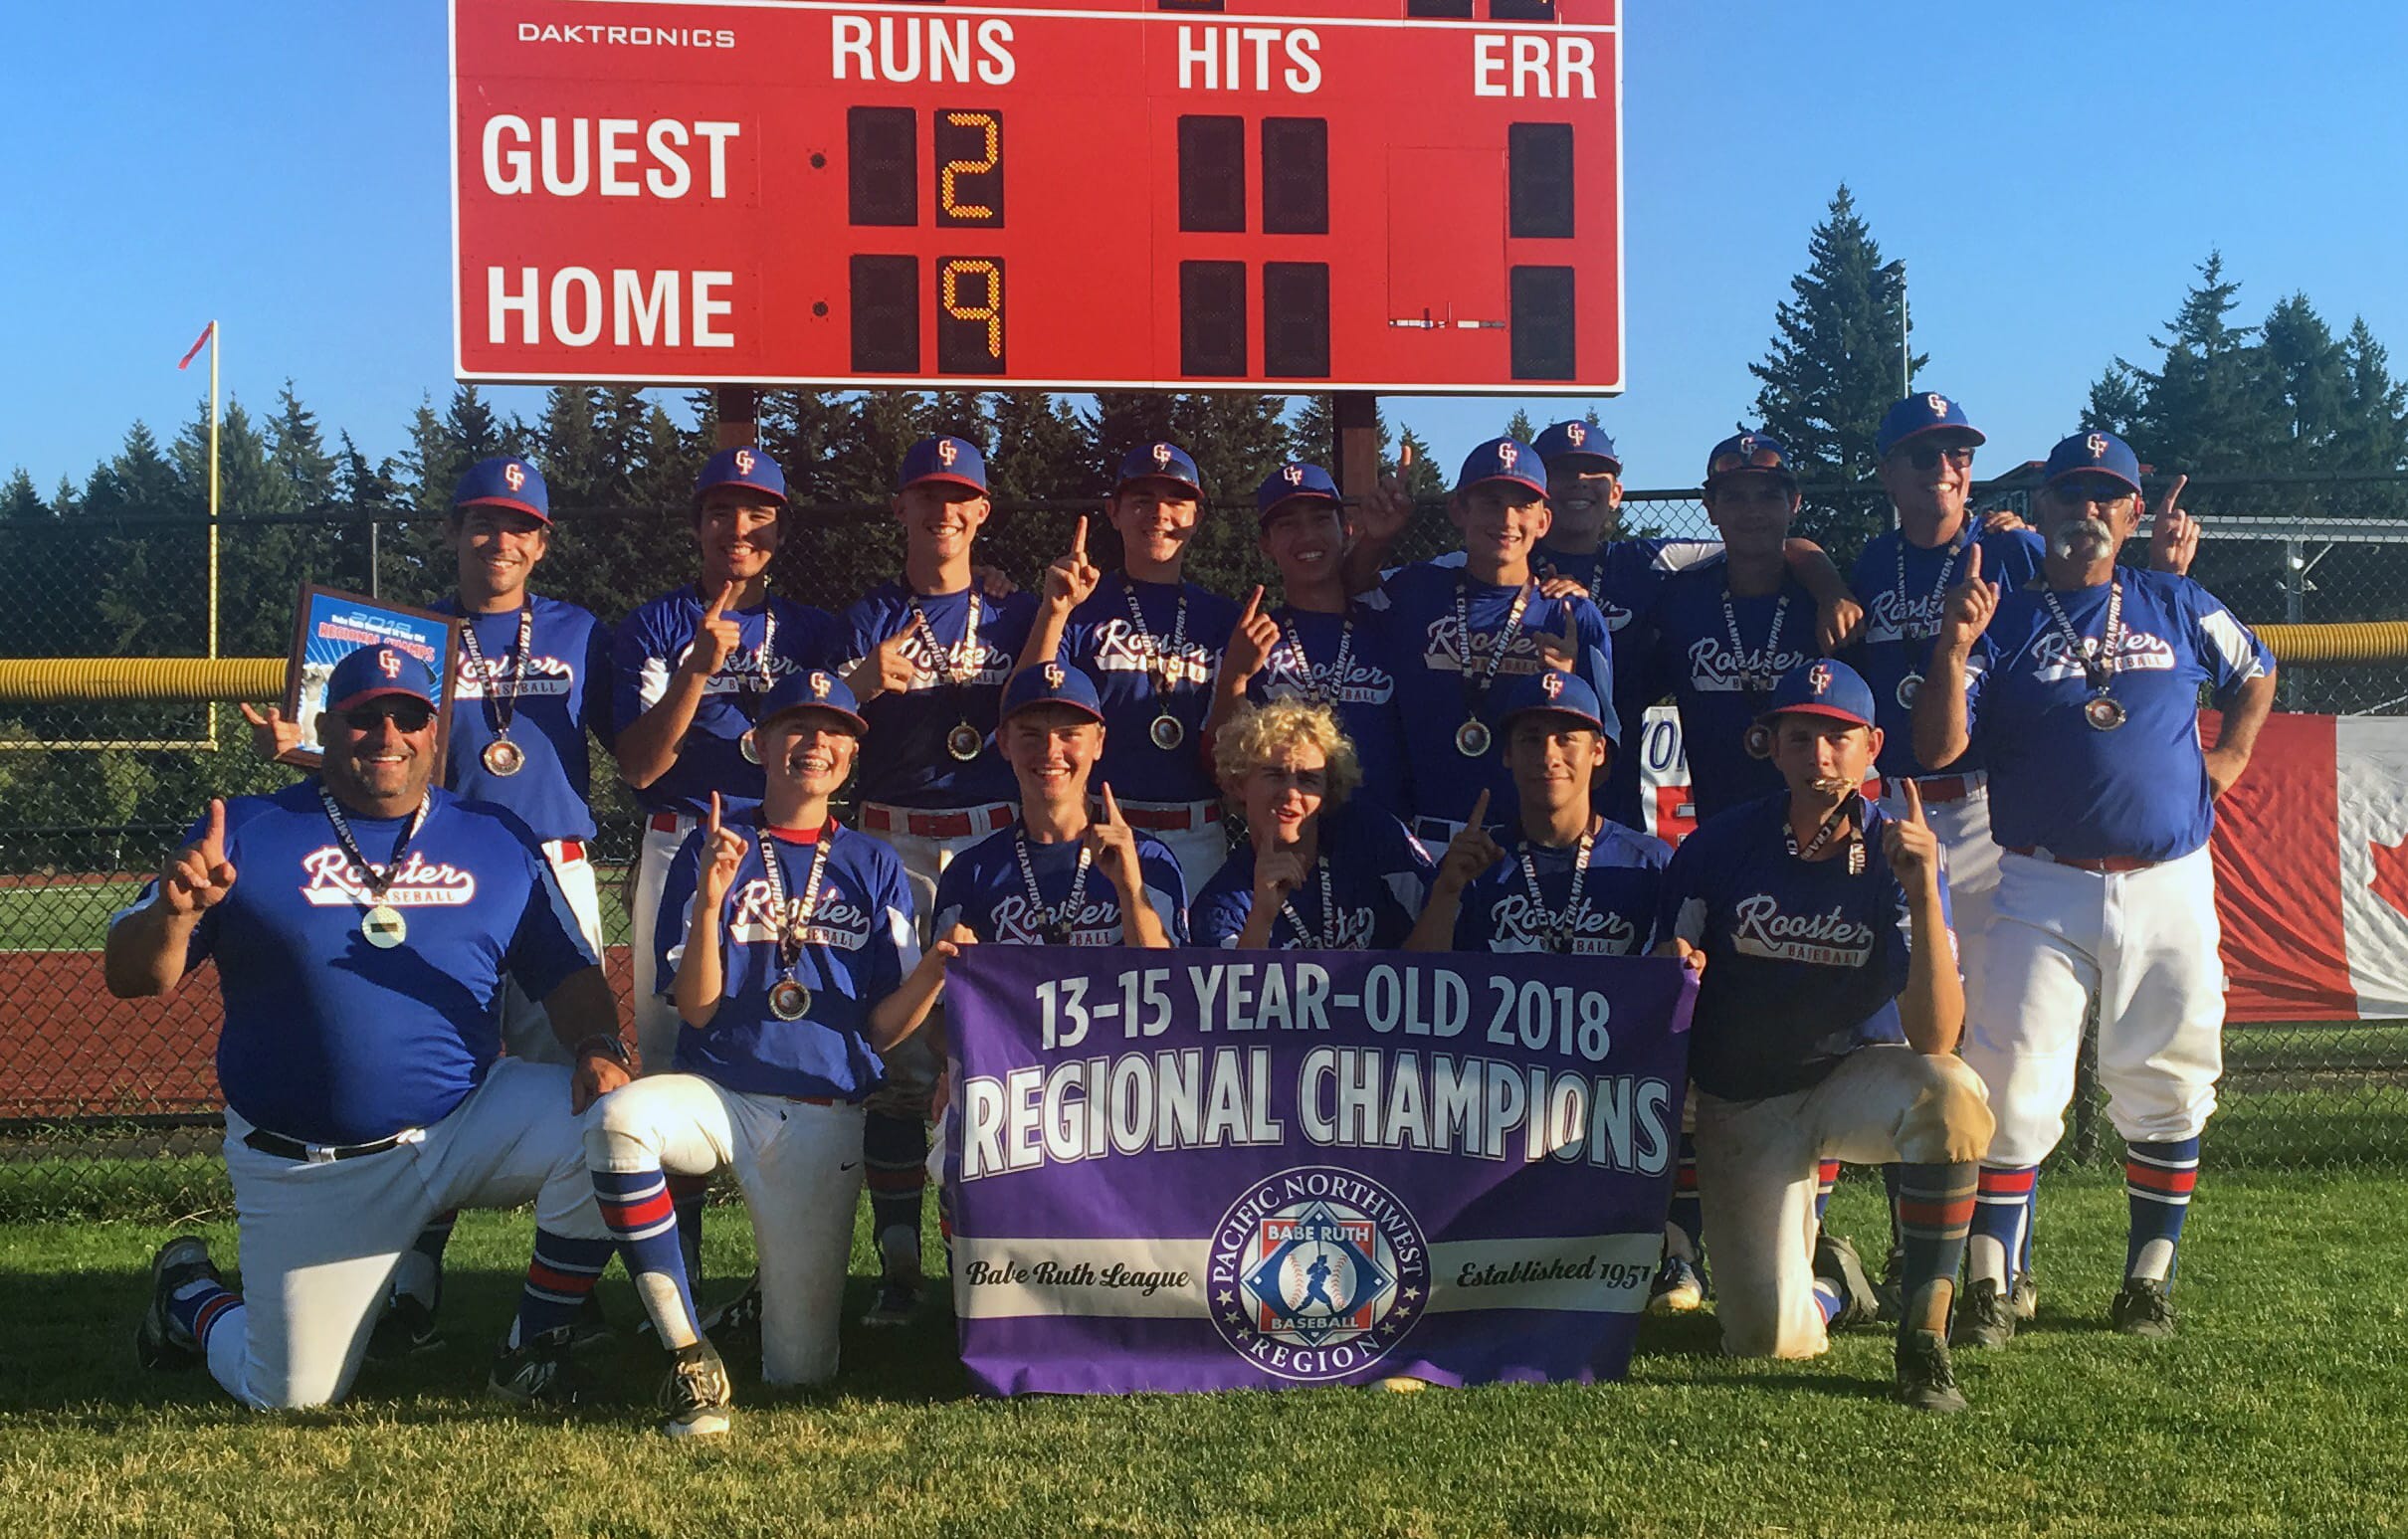 The KWRL Centerfield Roosters won the 13-15 year-old Babe Ruth Pacific Northwest Regional on Saturday, July 28, 2018, to advance to the World Series in Longview.